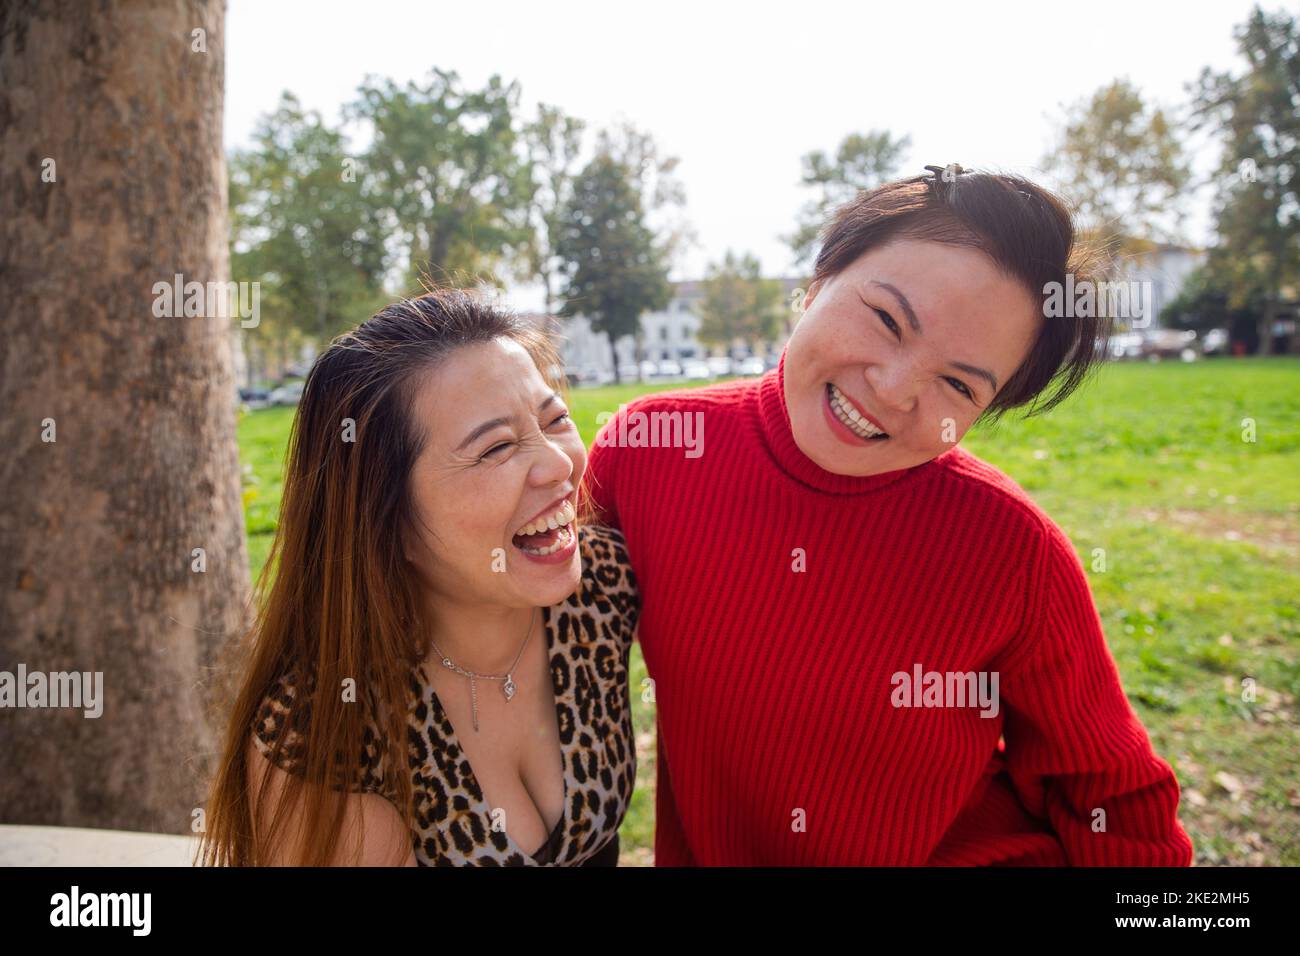 Happy middle age women having fun together outdoor. Friendship concept. Stock Photo